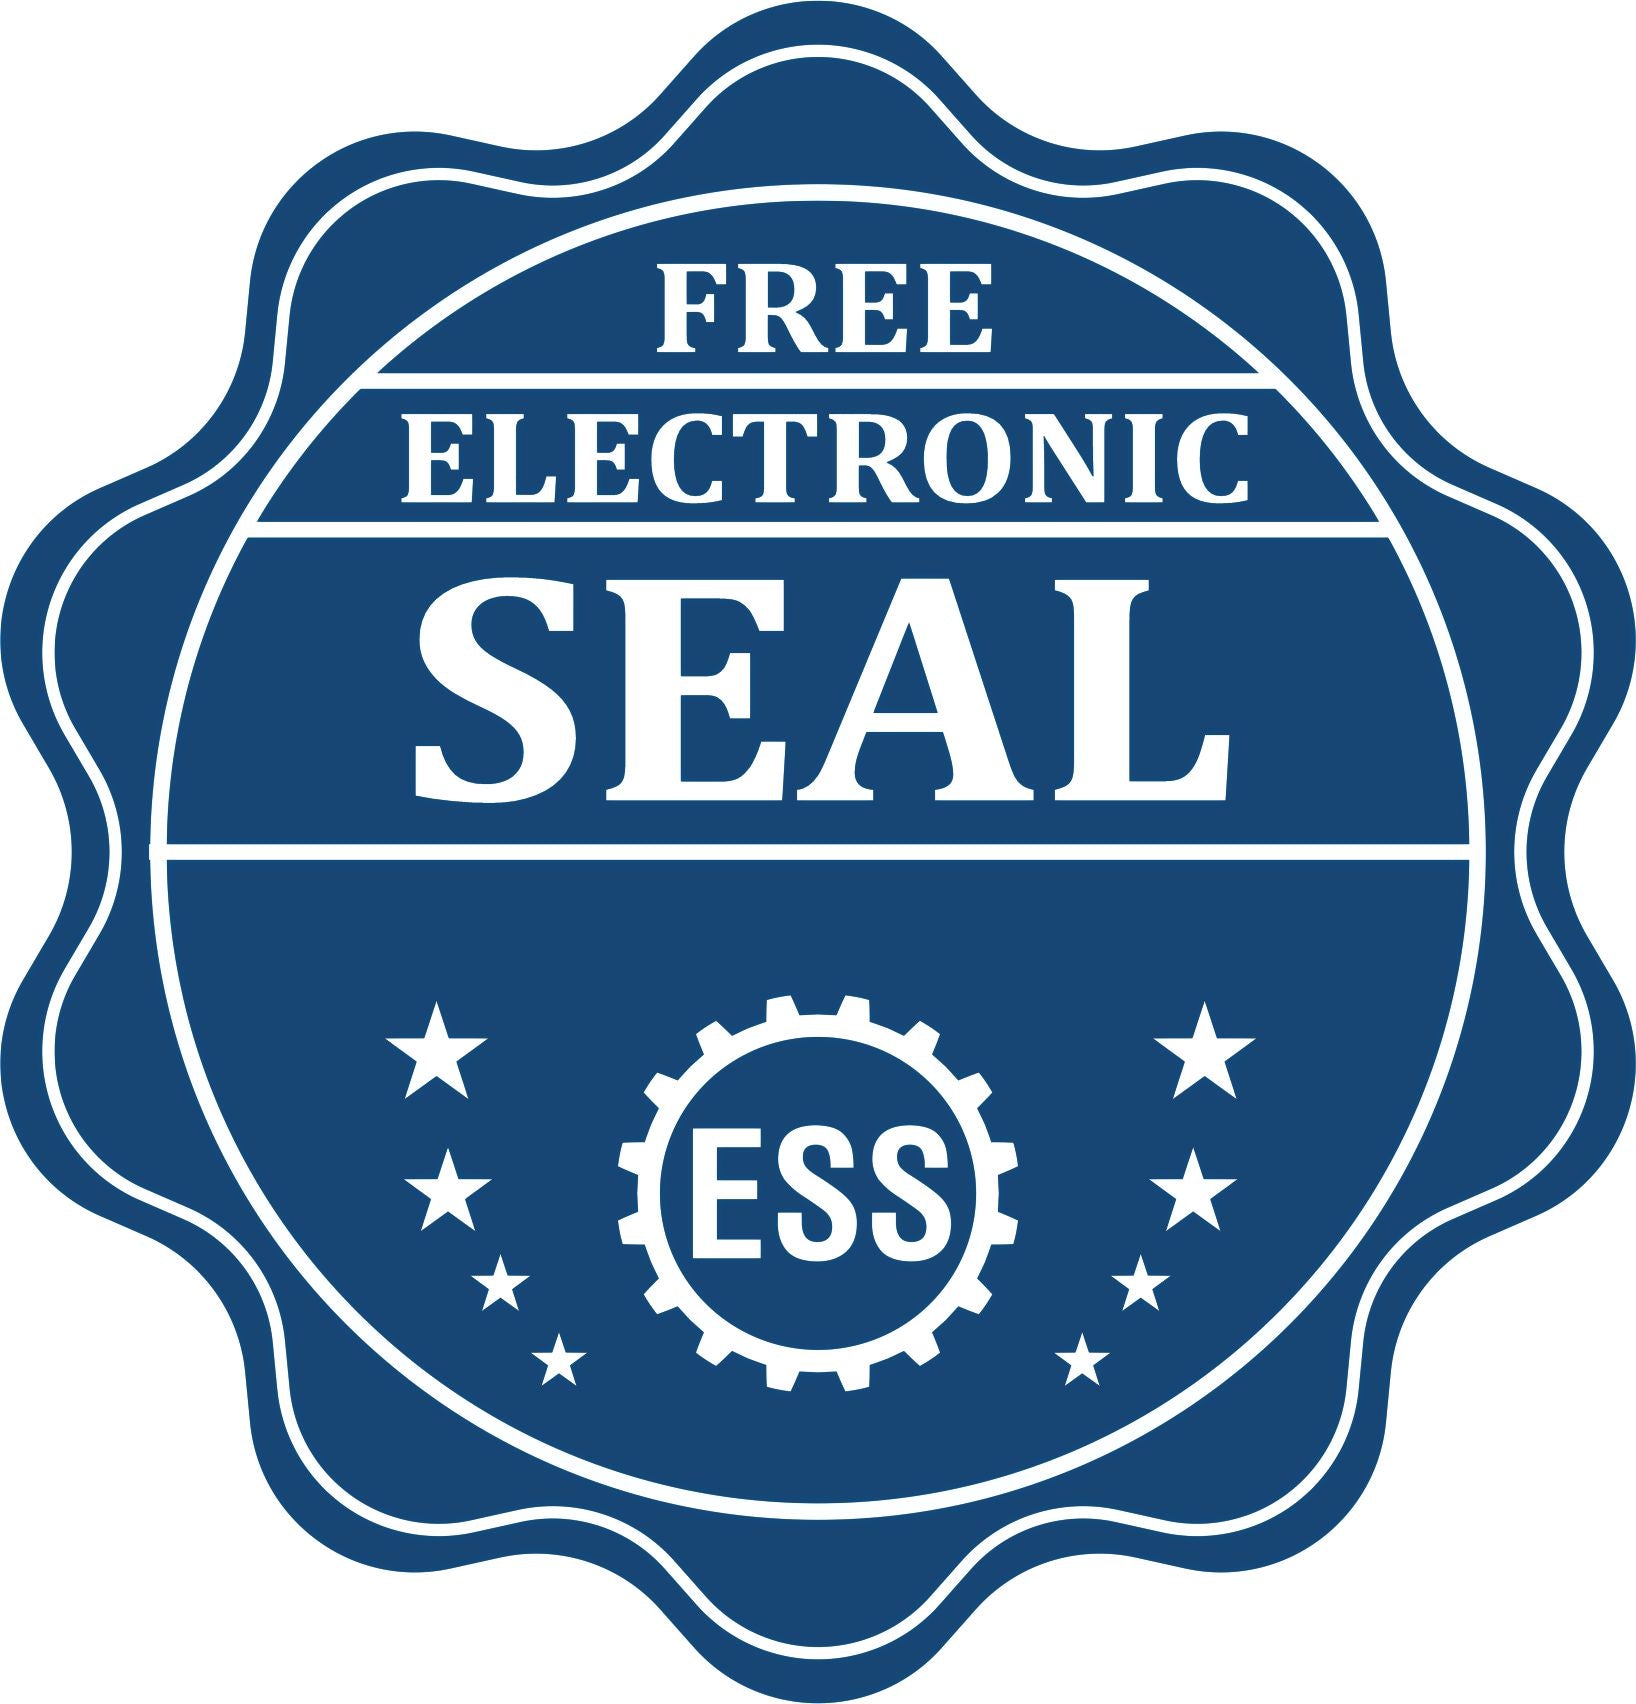 A badge showing a free electronic seal for the Premium MaxLight Pre-Inked Pennsylvania Engineering Stamp with stars and the ESS gear on the emblem.